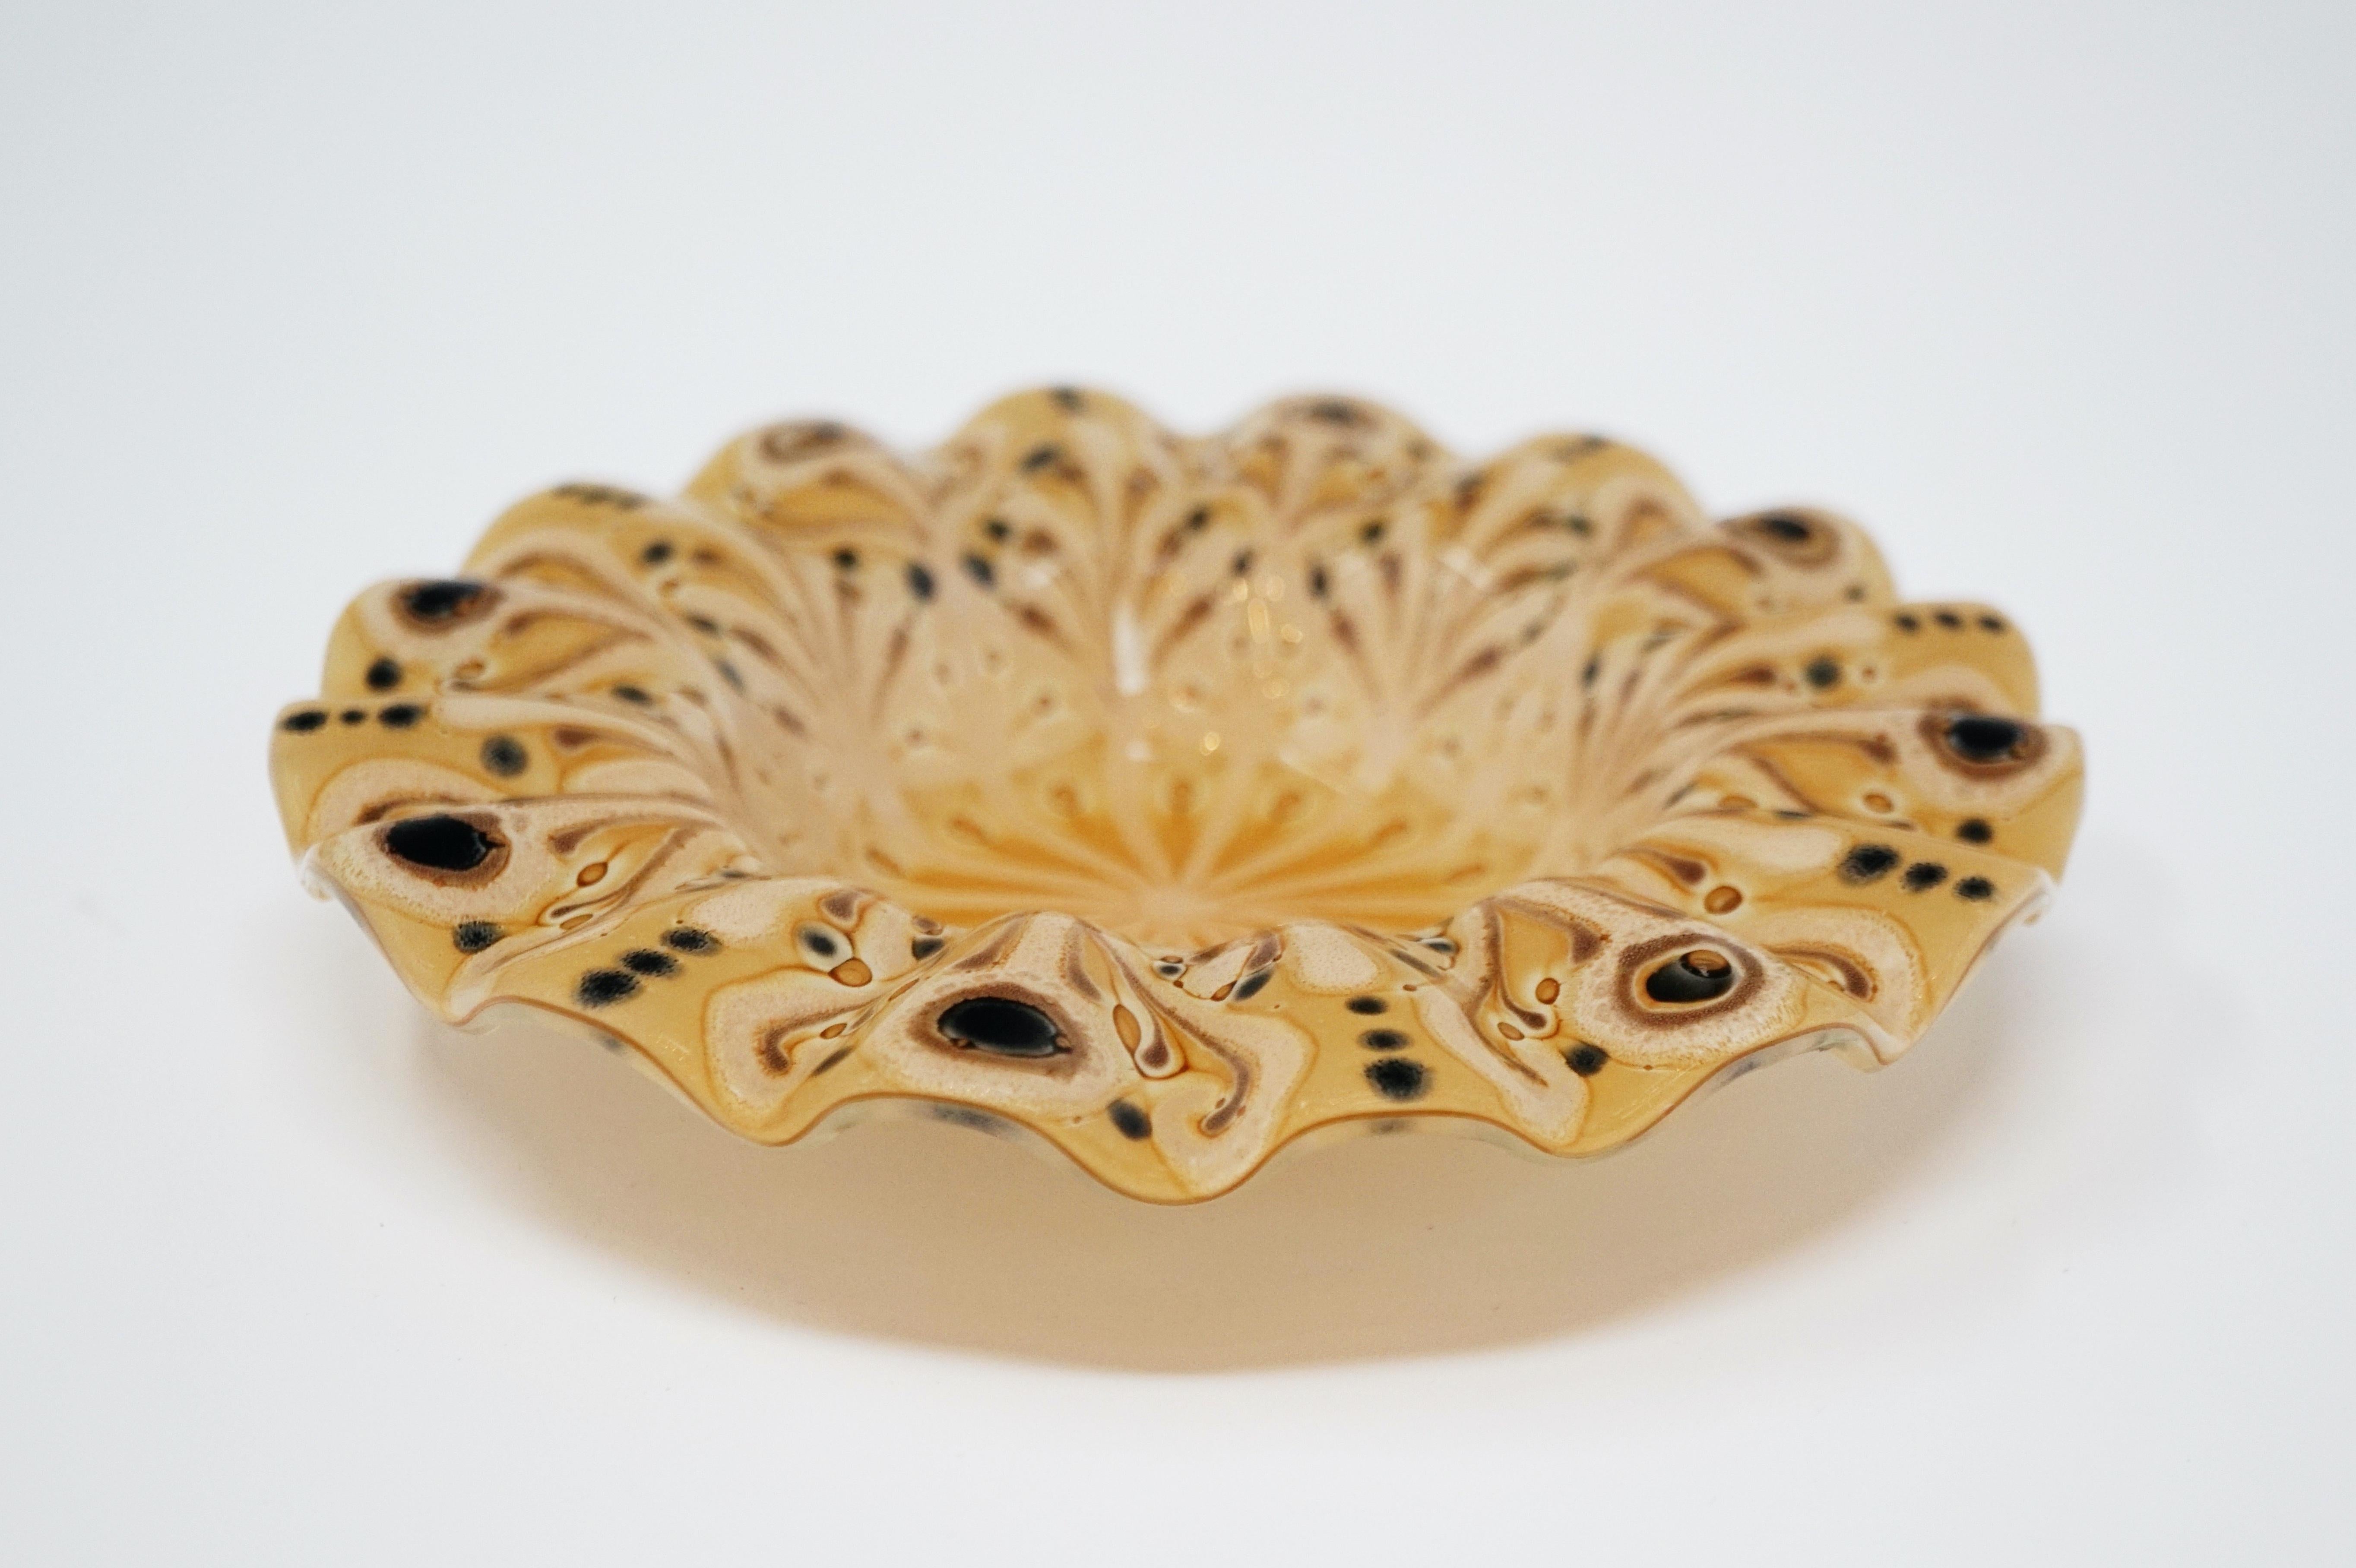 A fused glass decorative bowl or ashtray by Michael and Francis Higgins circa 1950s with honey beige motif. 

Signed “Higgins” on verso.

Measures 7